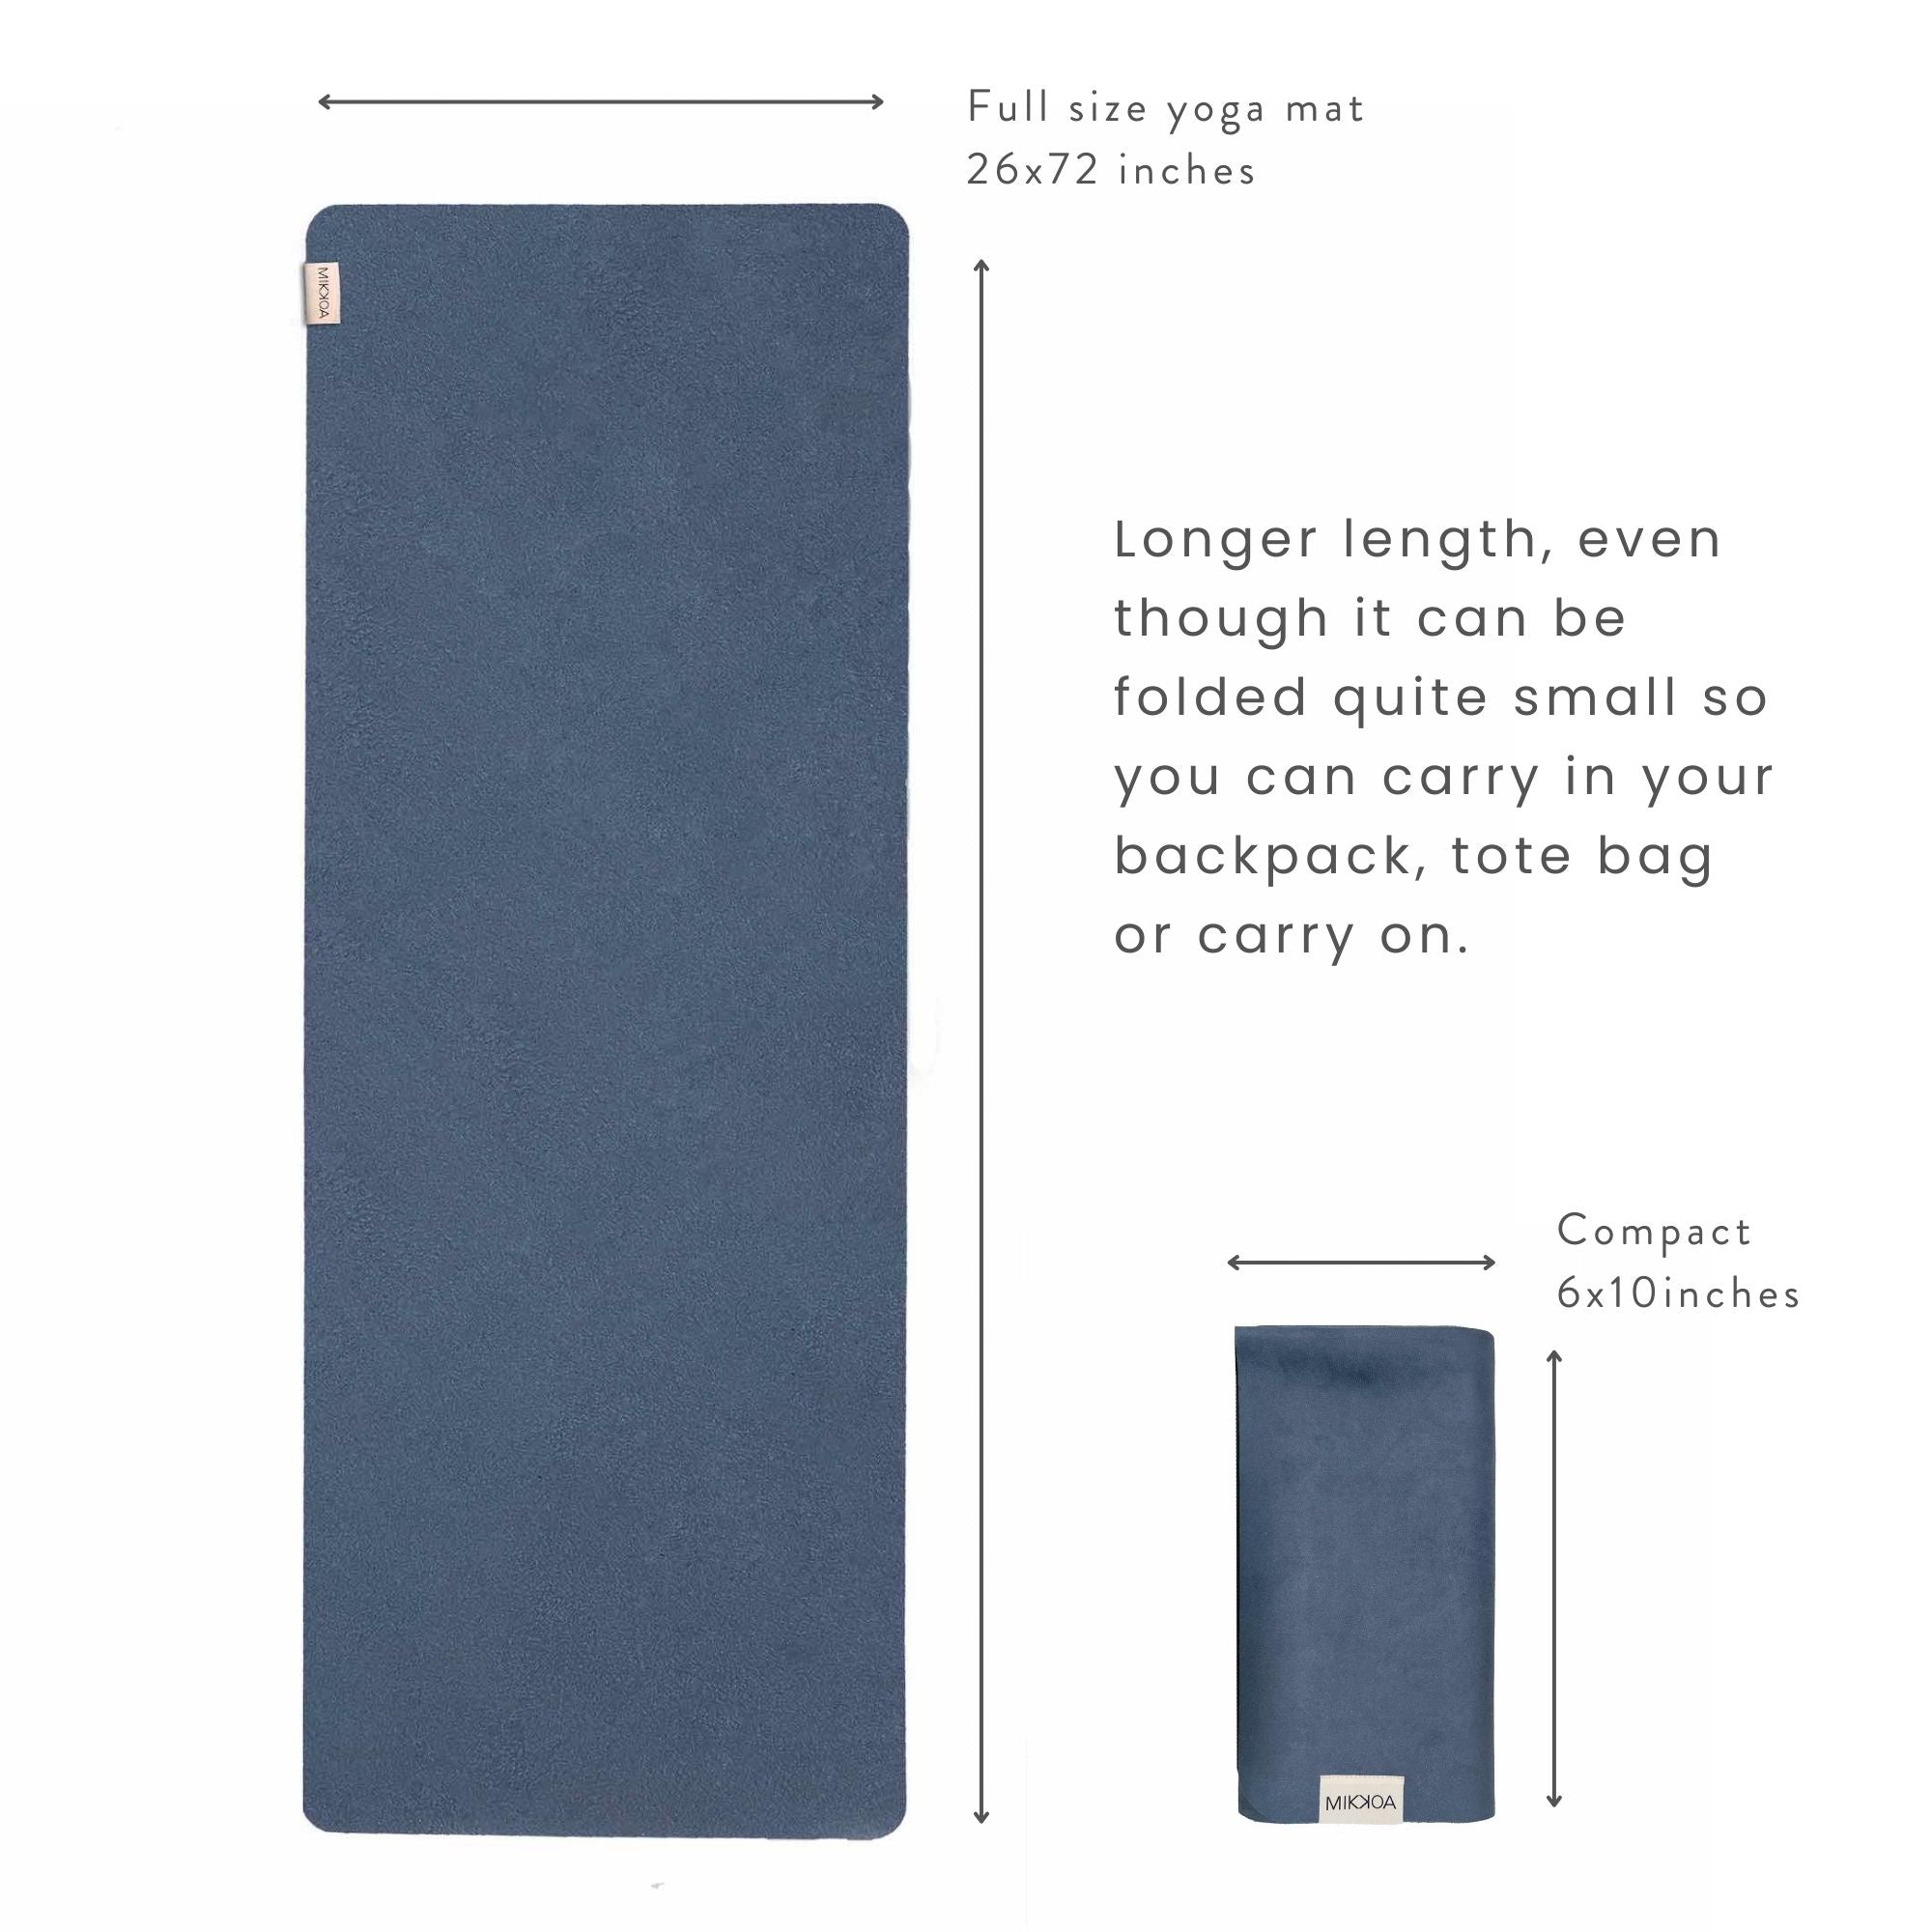 Space Backpacking Travel Yoga Mat | Only at Mikkoa